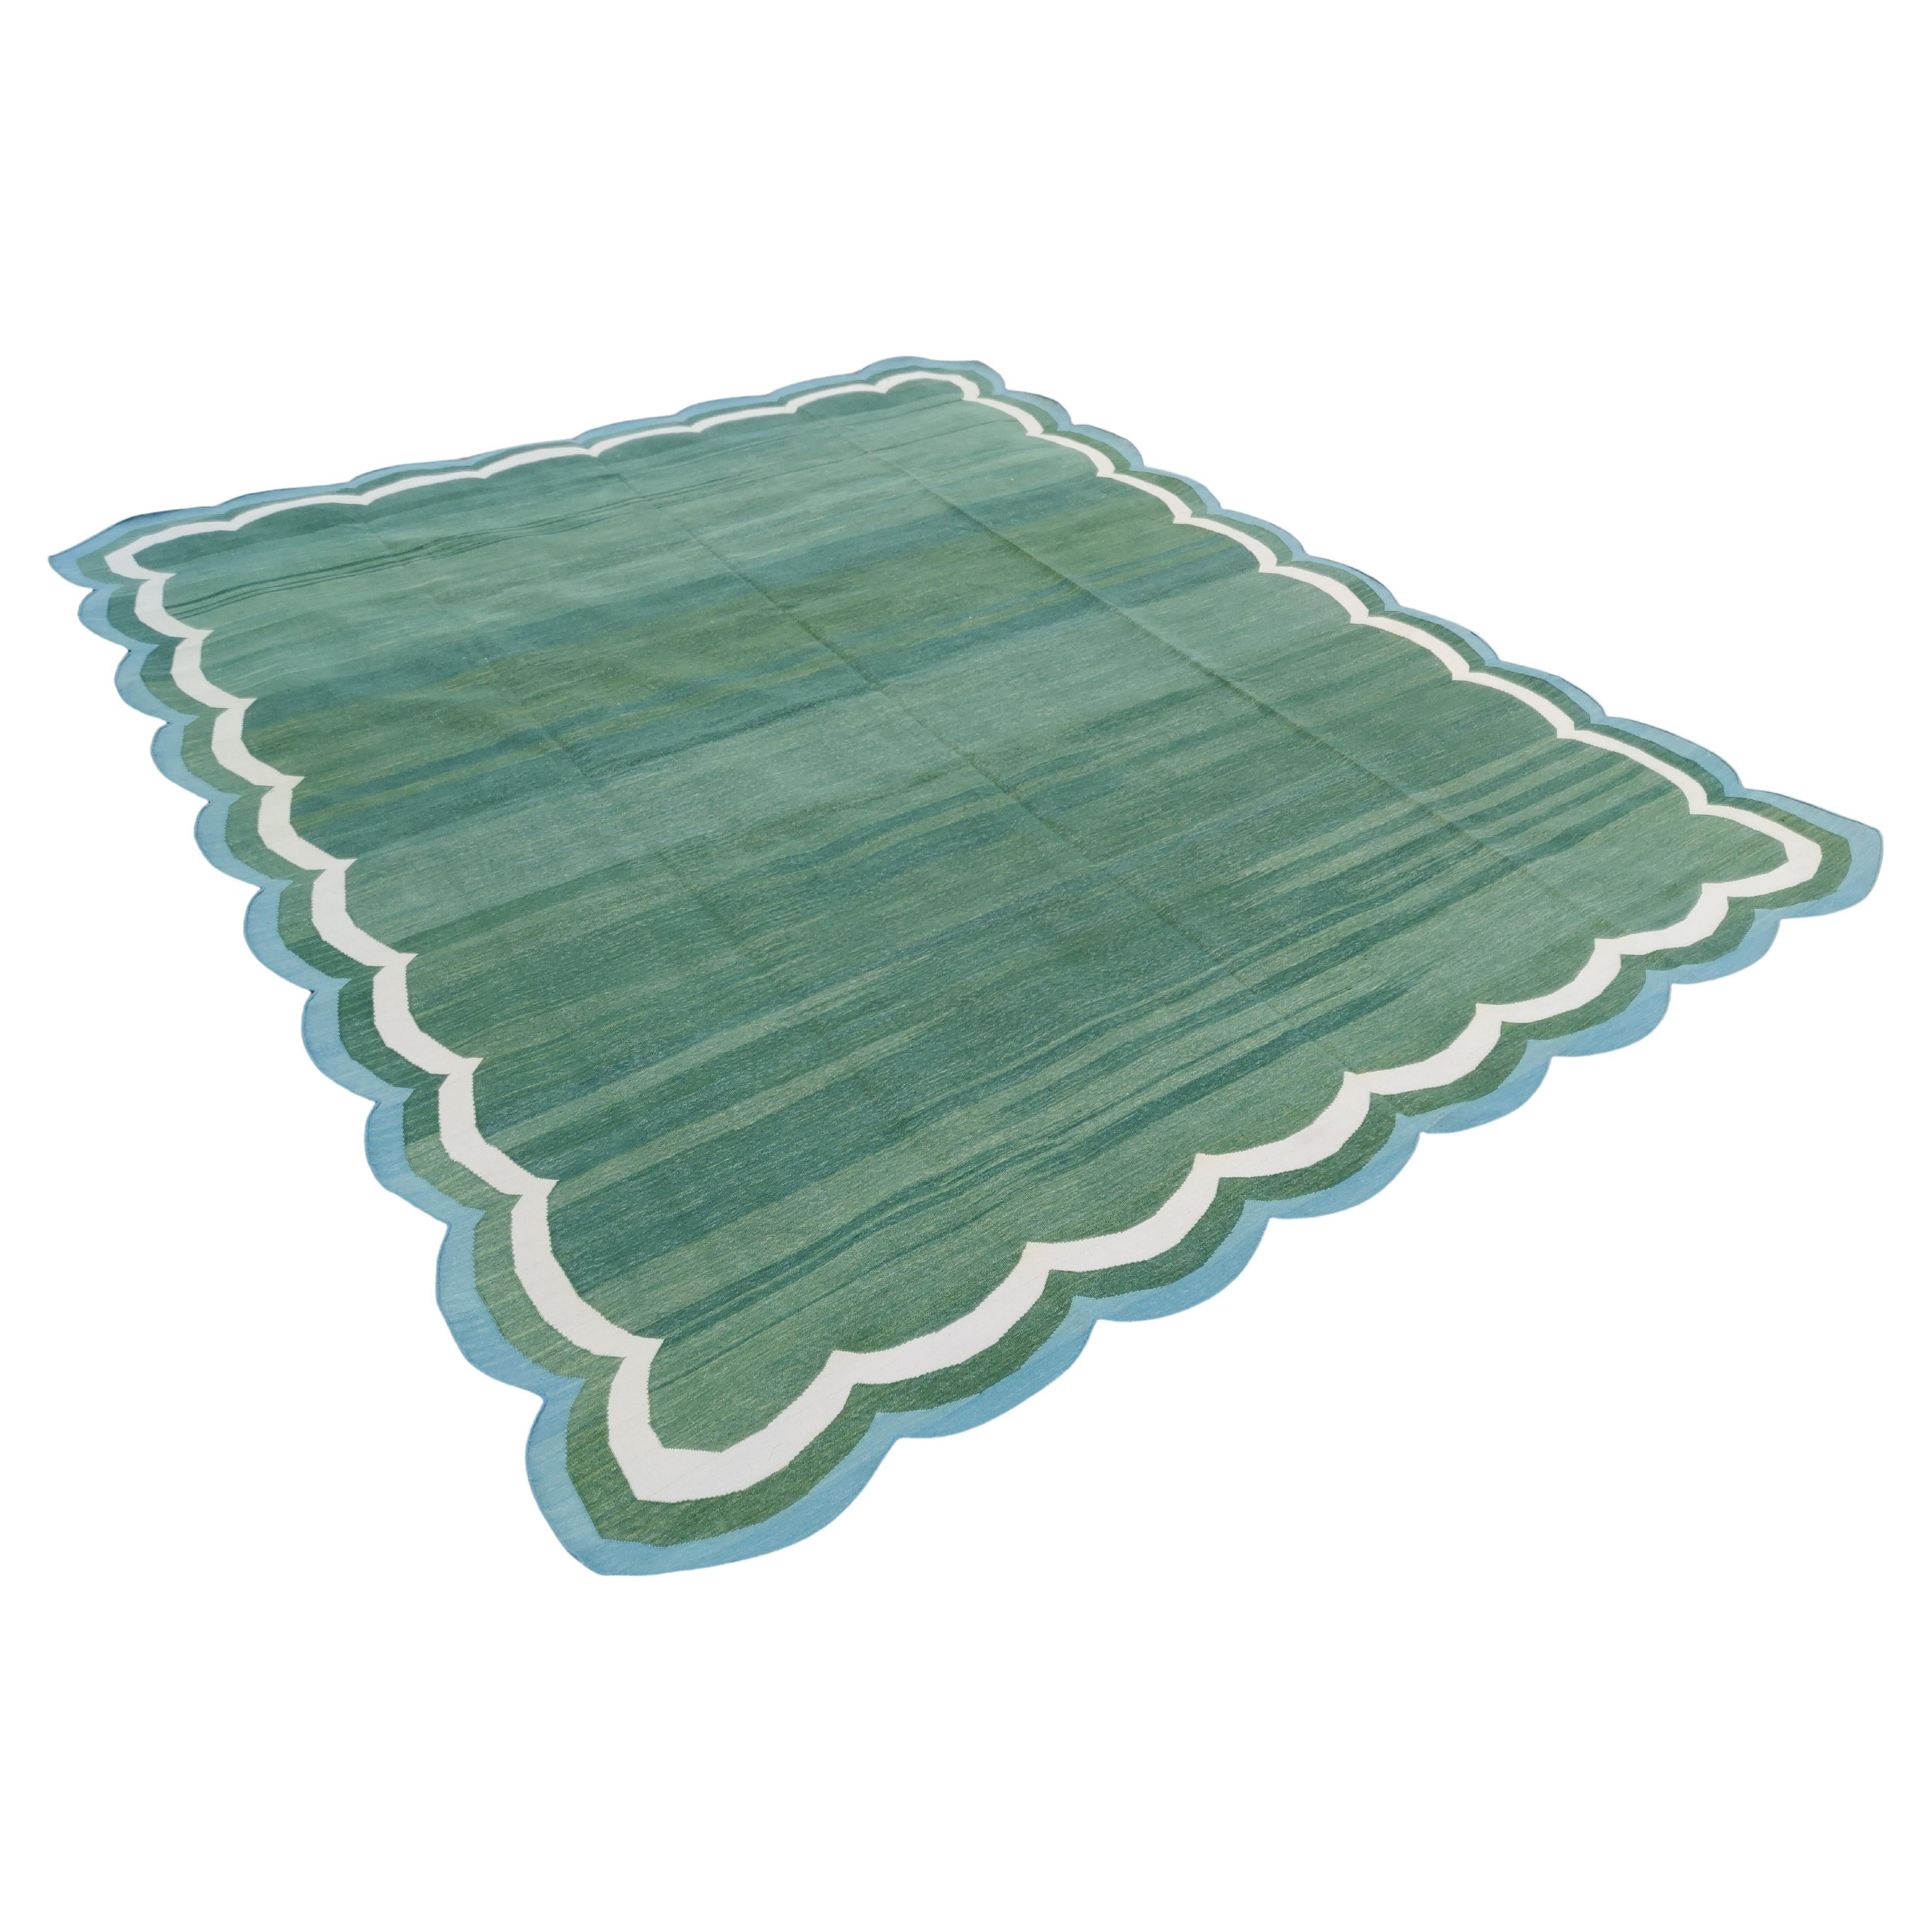 Handmade Cotton Flat Weave Rug, 8x10 Green And Blue Scalloped Indian Dhurrie Rug For Sale